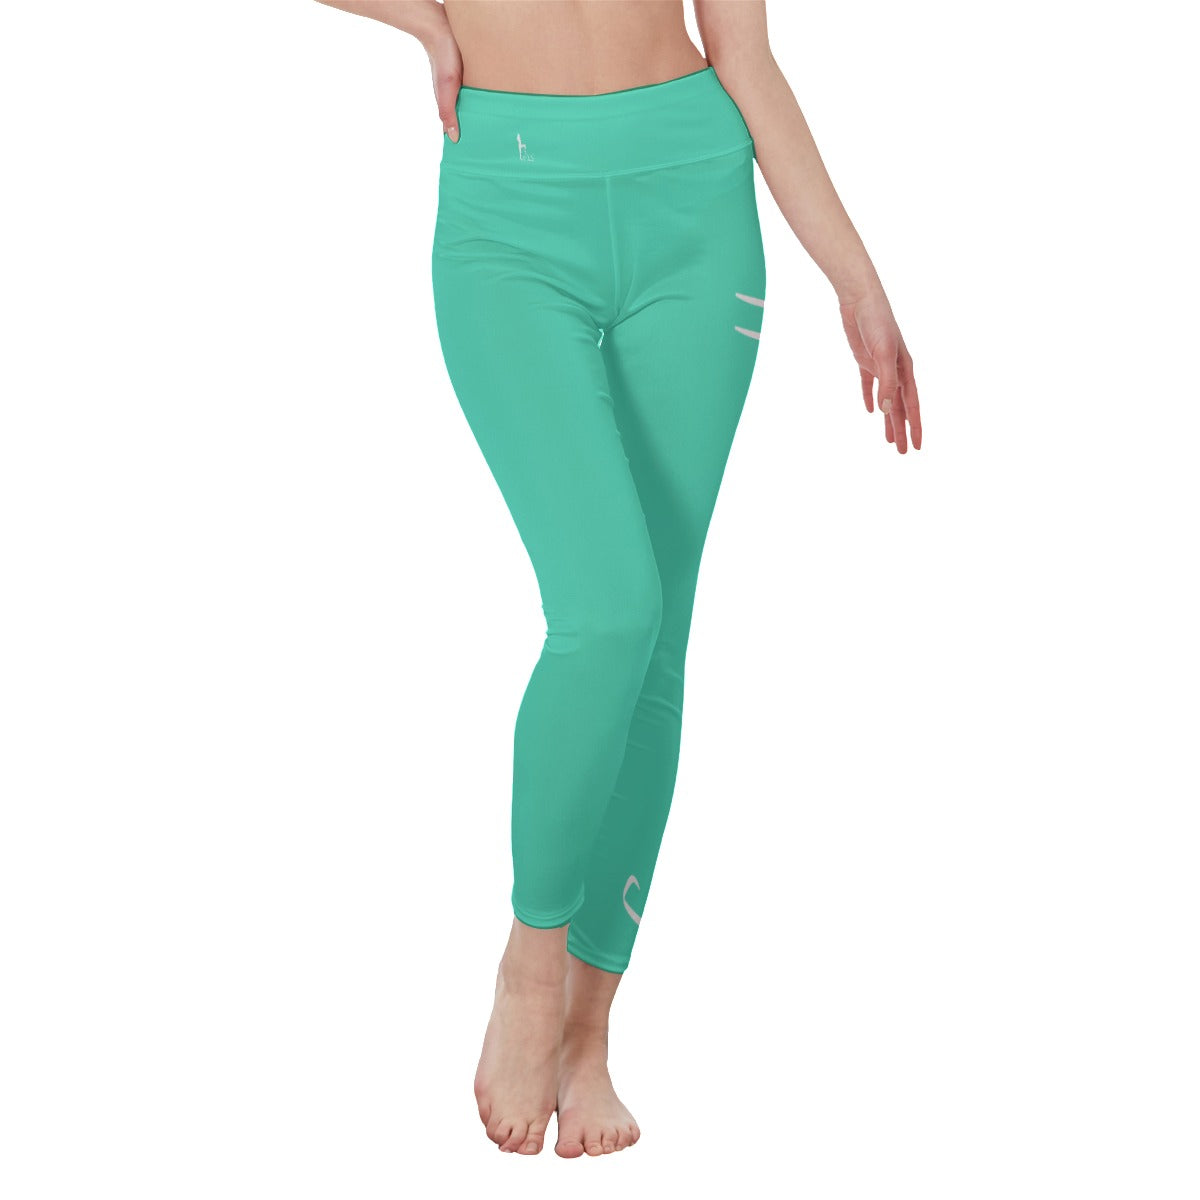 👖 Officially Sexy Colors Collection Turquoise Green With White Logo Women's High Waist Leggings Color #50E3C2 👖